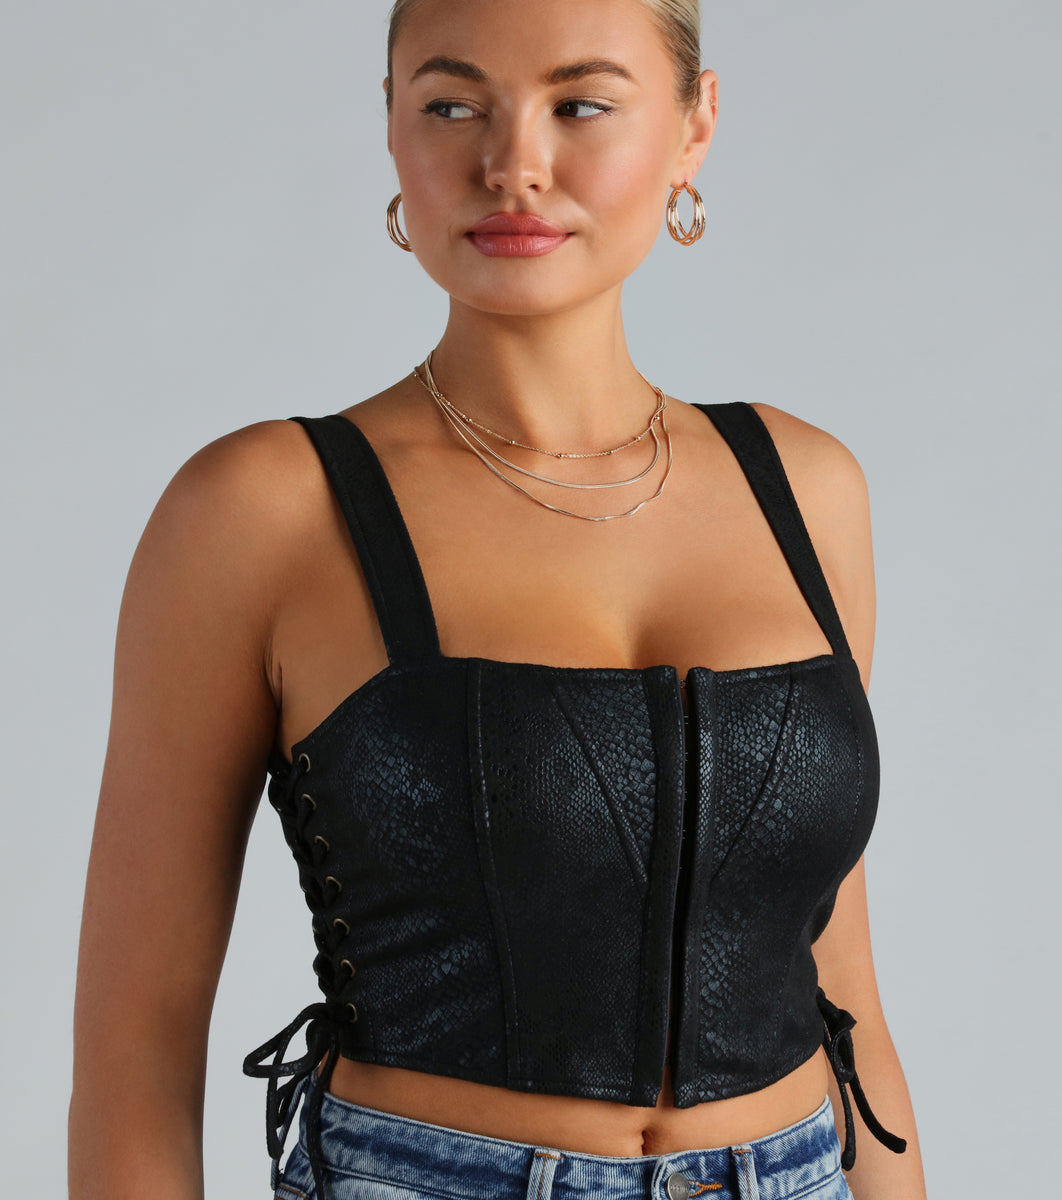 Windsor Sultry Snake Print Faux Leather Bustier Top